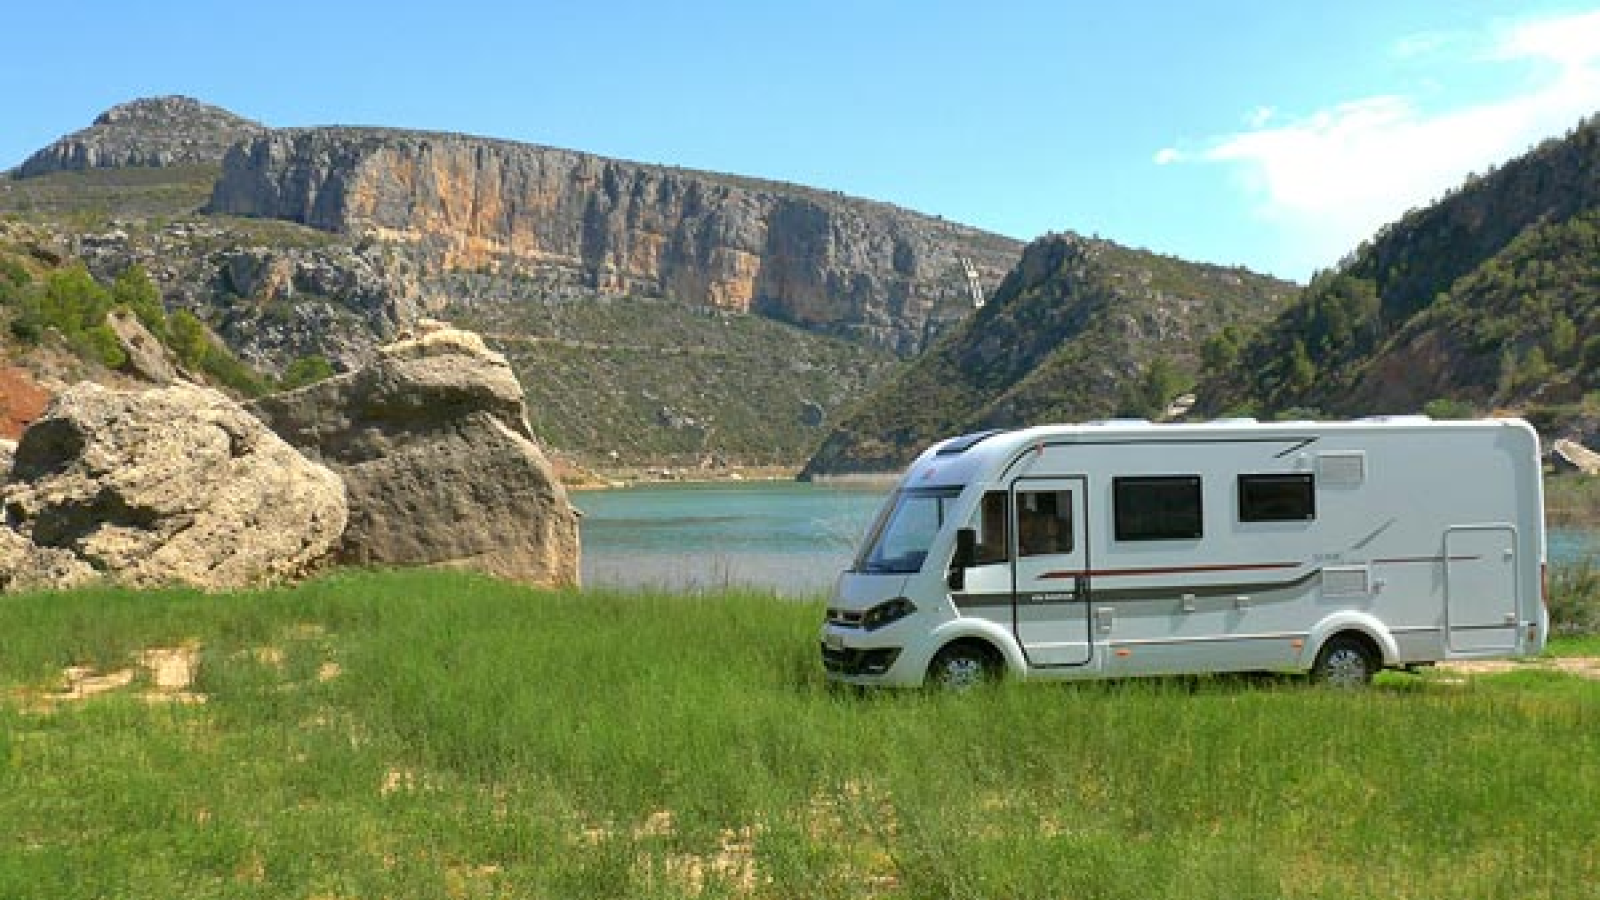 MOTORHOMES ARE IN FASHION, SALES ARE SOaring